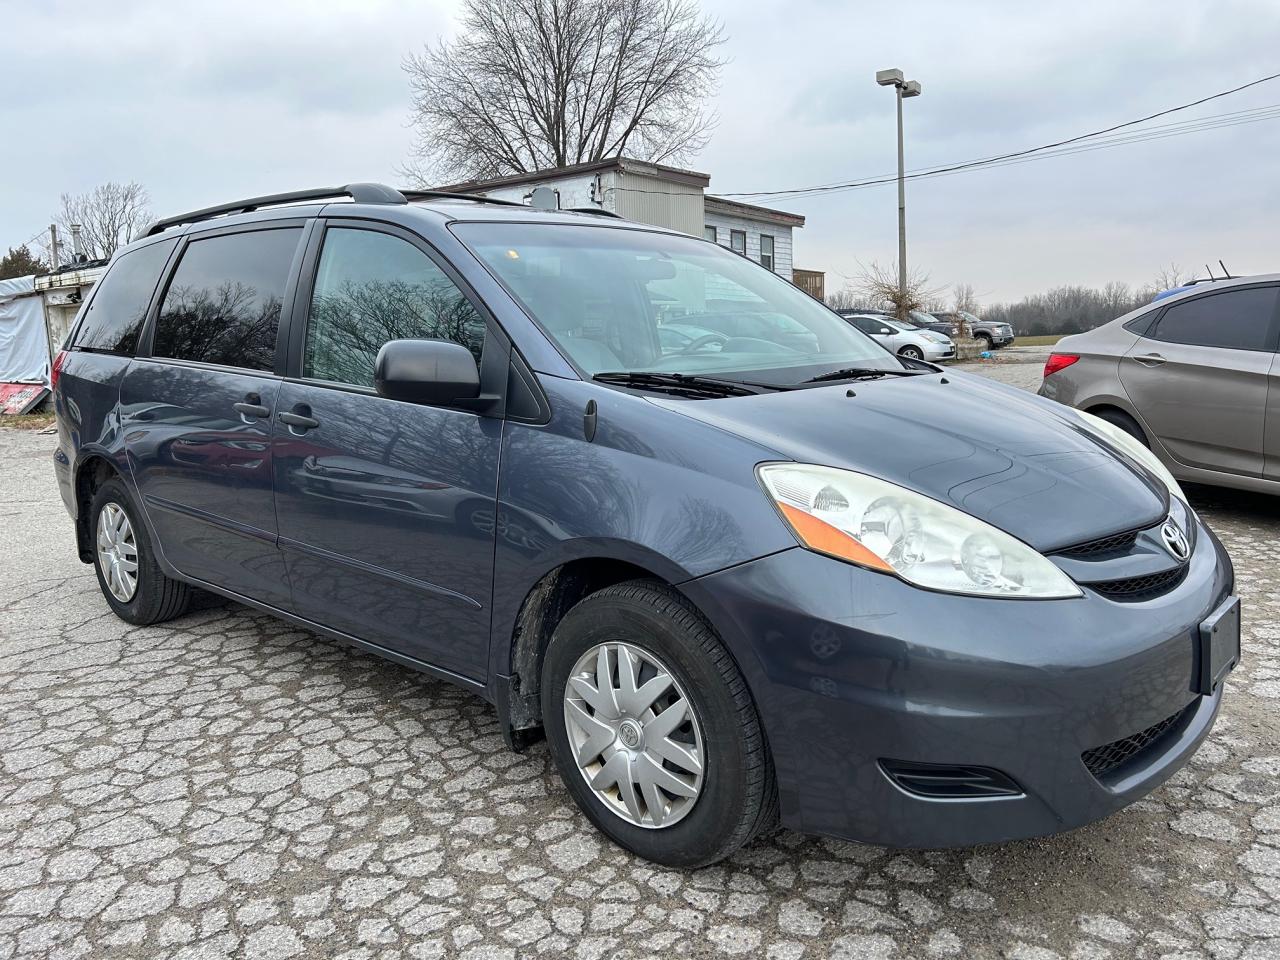 2009 Toyota Sienna CE*7 PASS*219 KMS*NO ACCIDENTS*CLEAN CARFAX*CERT* - Photo #3